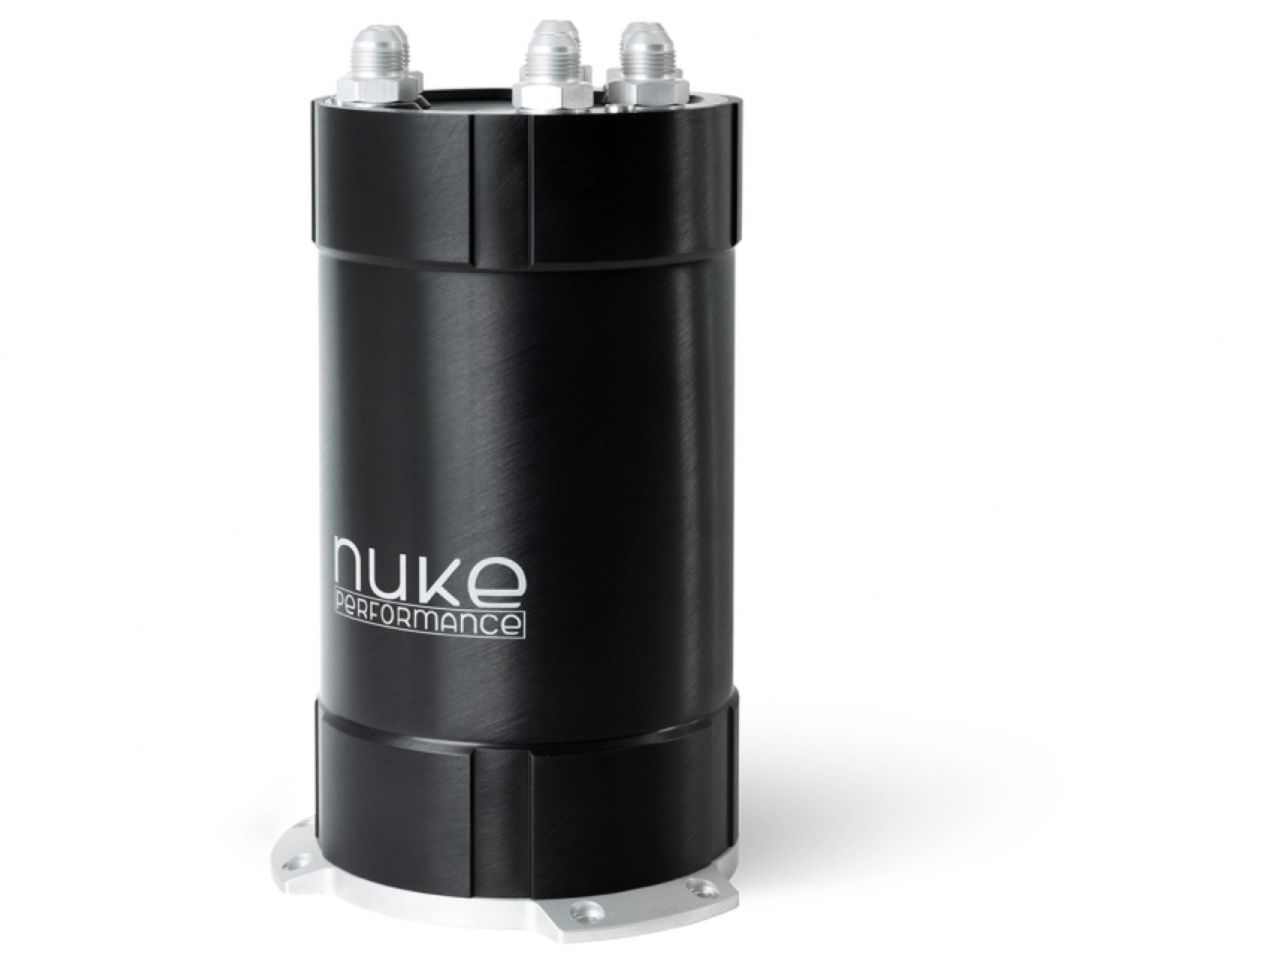 Nuke Performance 2G Fuel Surge Tank 3.0 Liter For Up to Three External Fuel Pumps